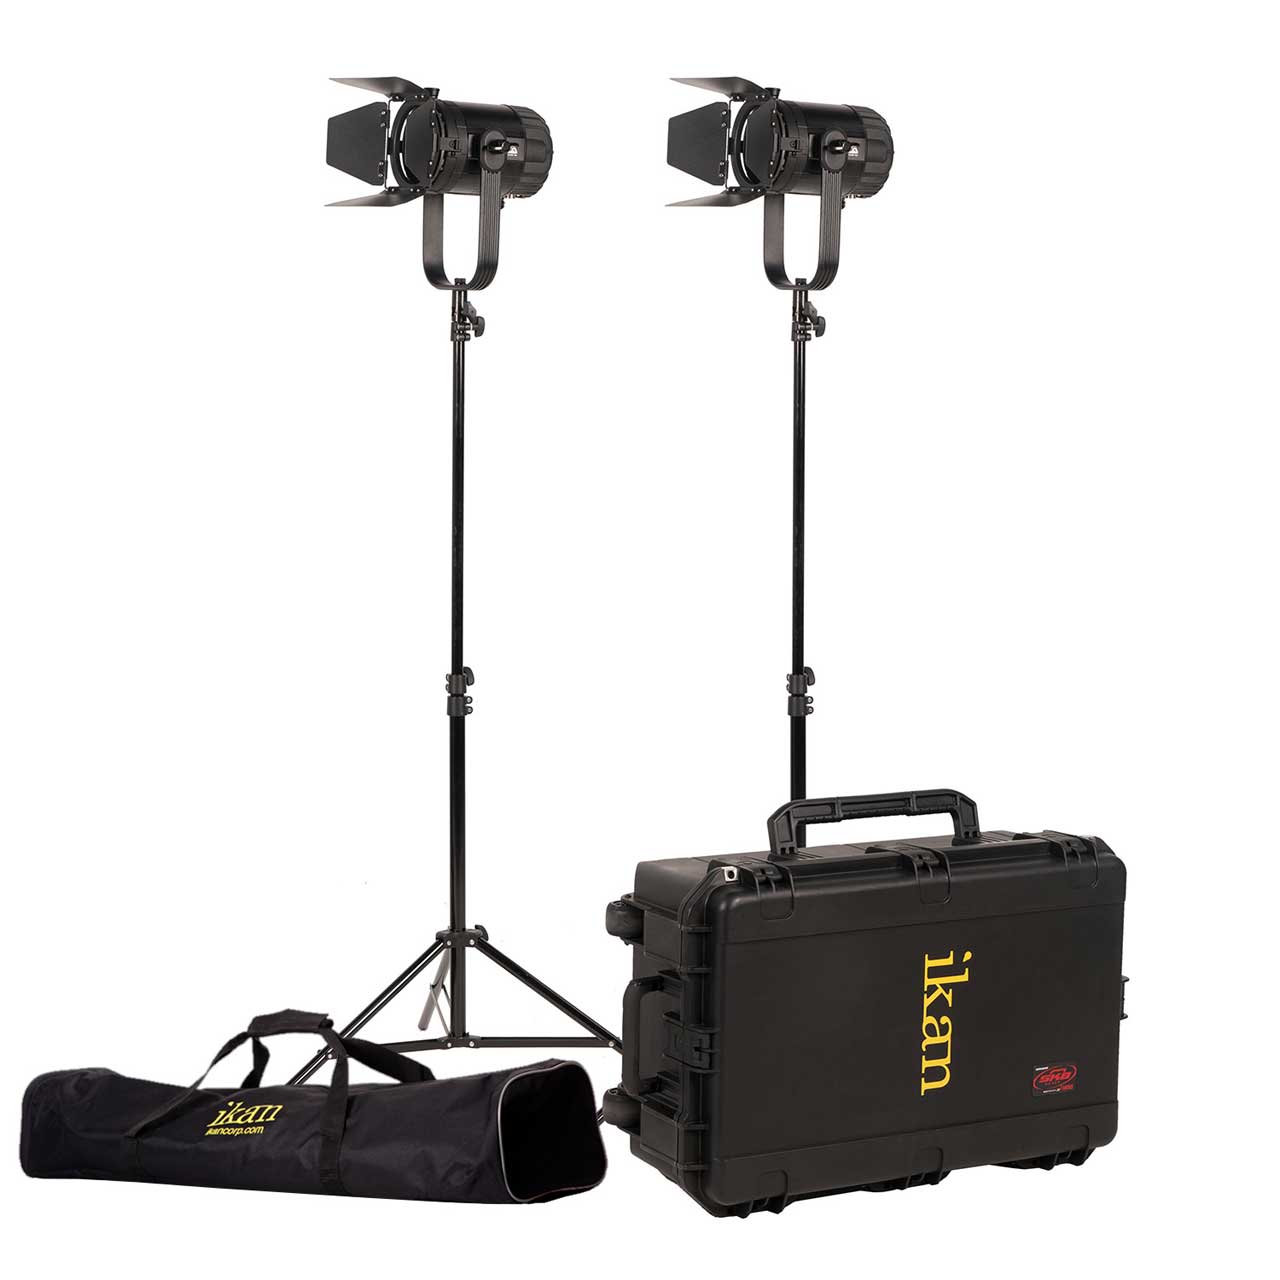 ikan SFB150-G Stryder Kit - Includes 2x Stryder 150 Watt Fresnel with Hard Case - Gold Mount IKAN-SFB150G2PKT